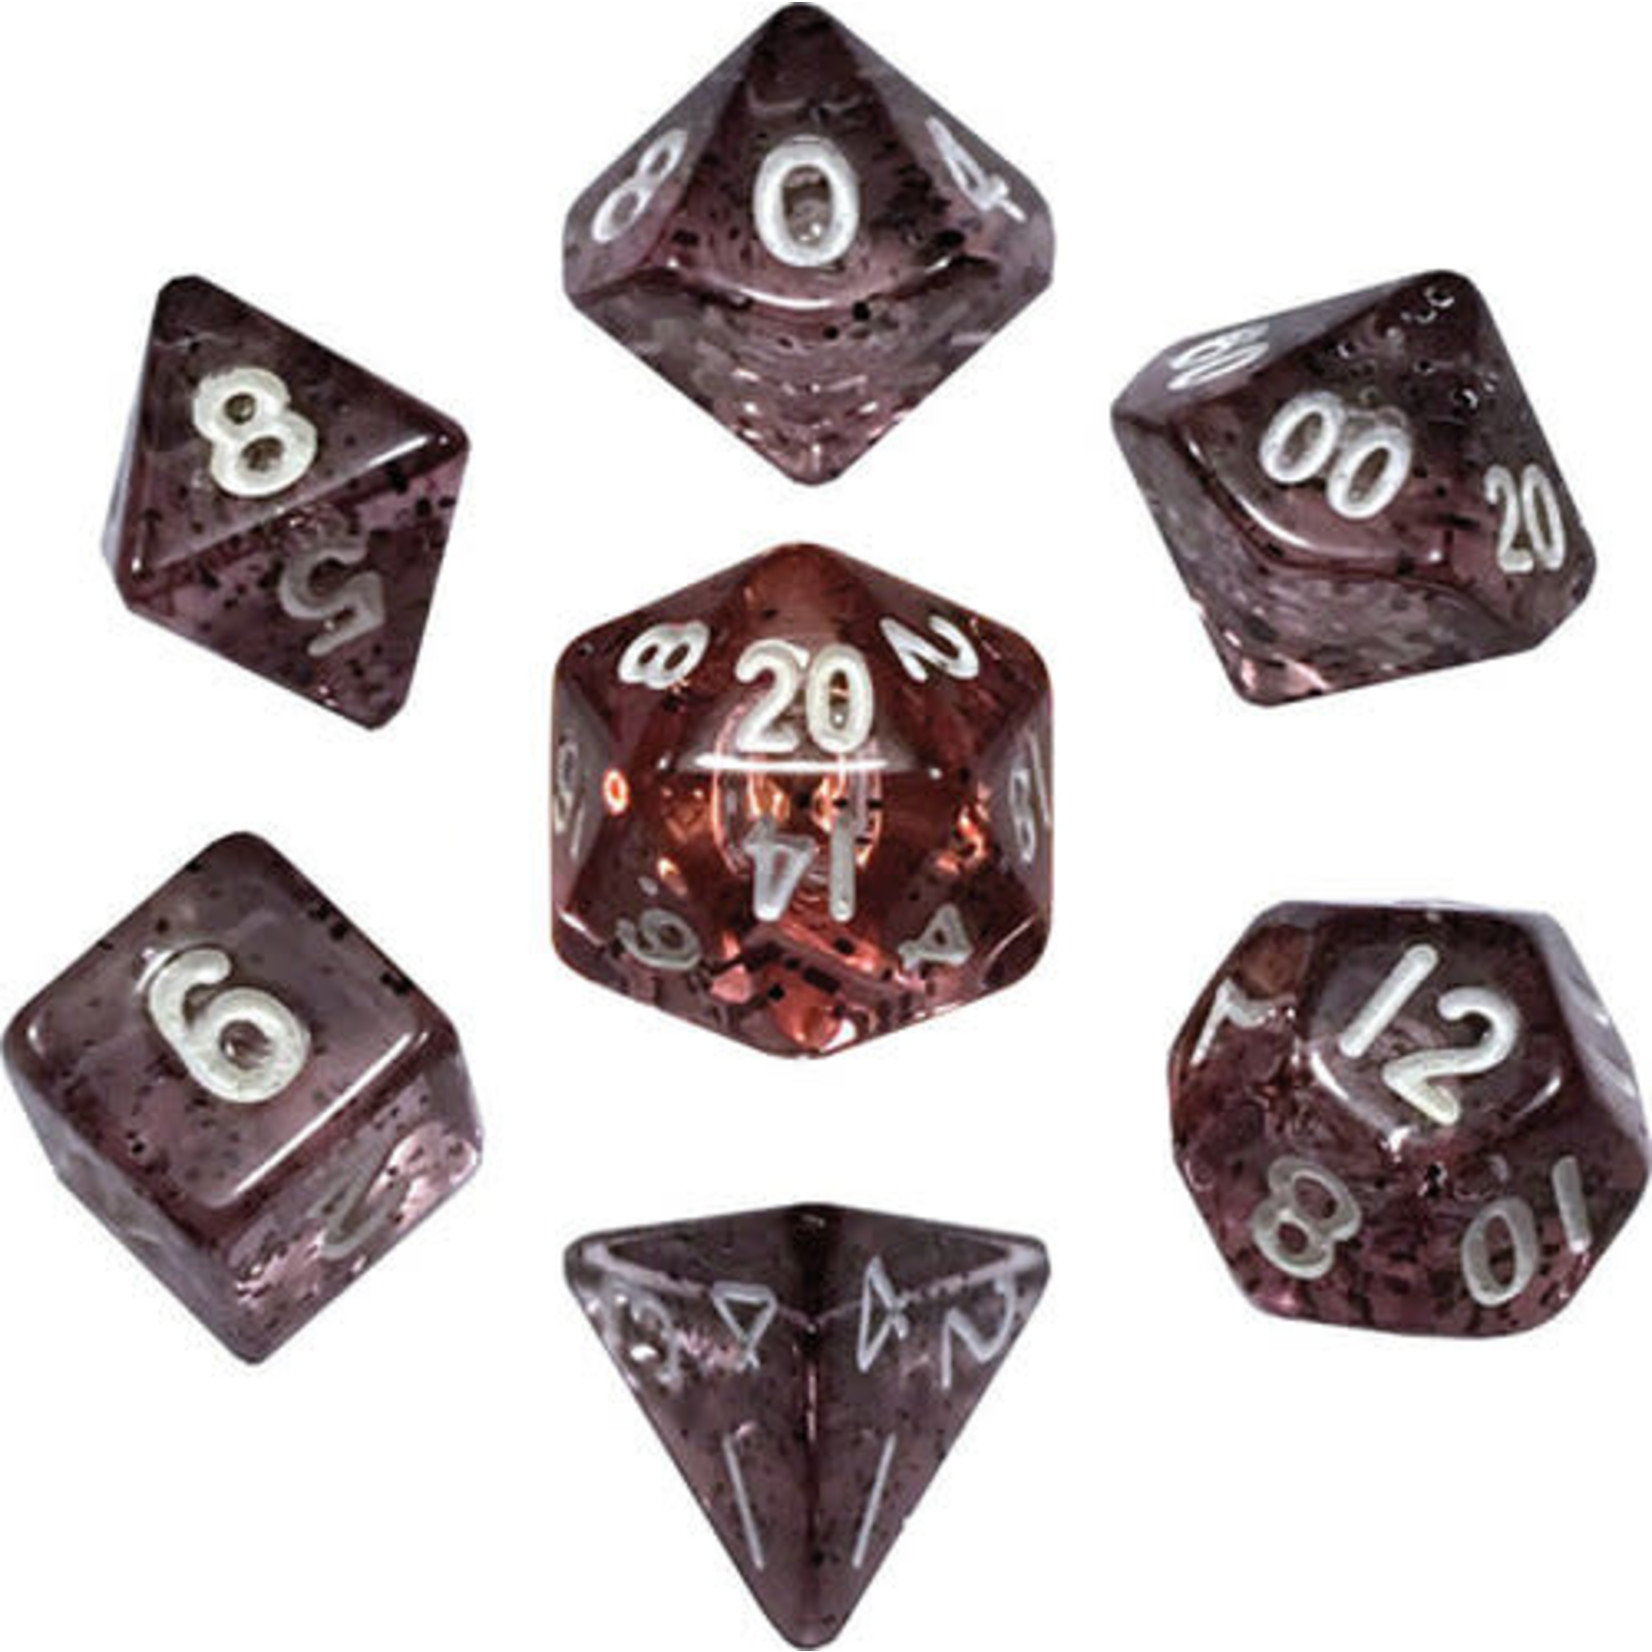 Metallic Dice Games 7-Piece Dice Set: Ethereal Black with White Numbers (10mm)